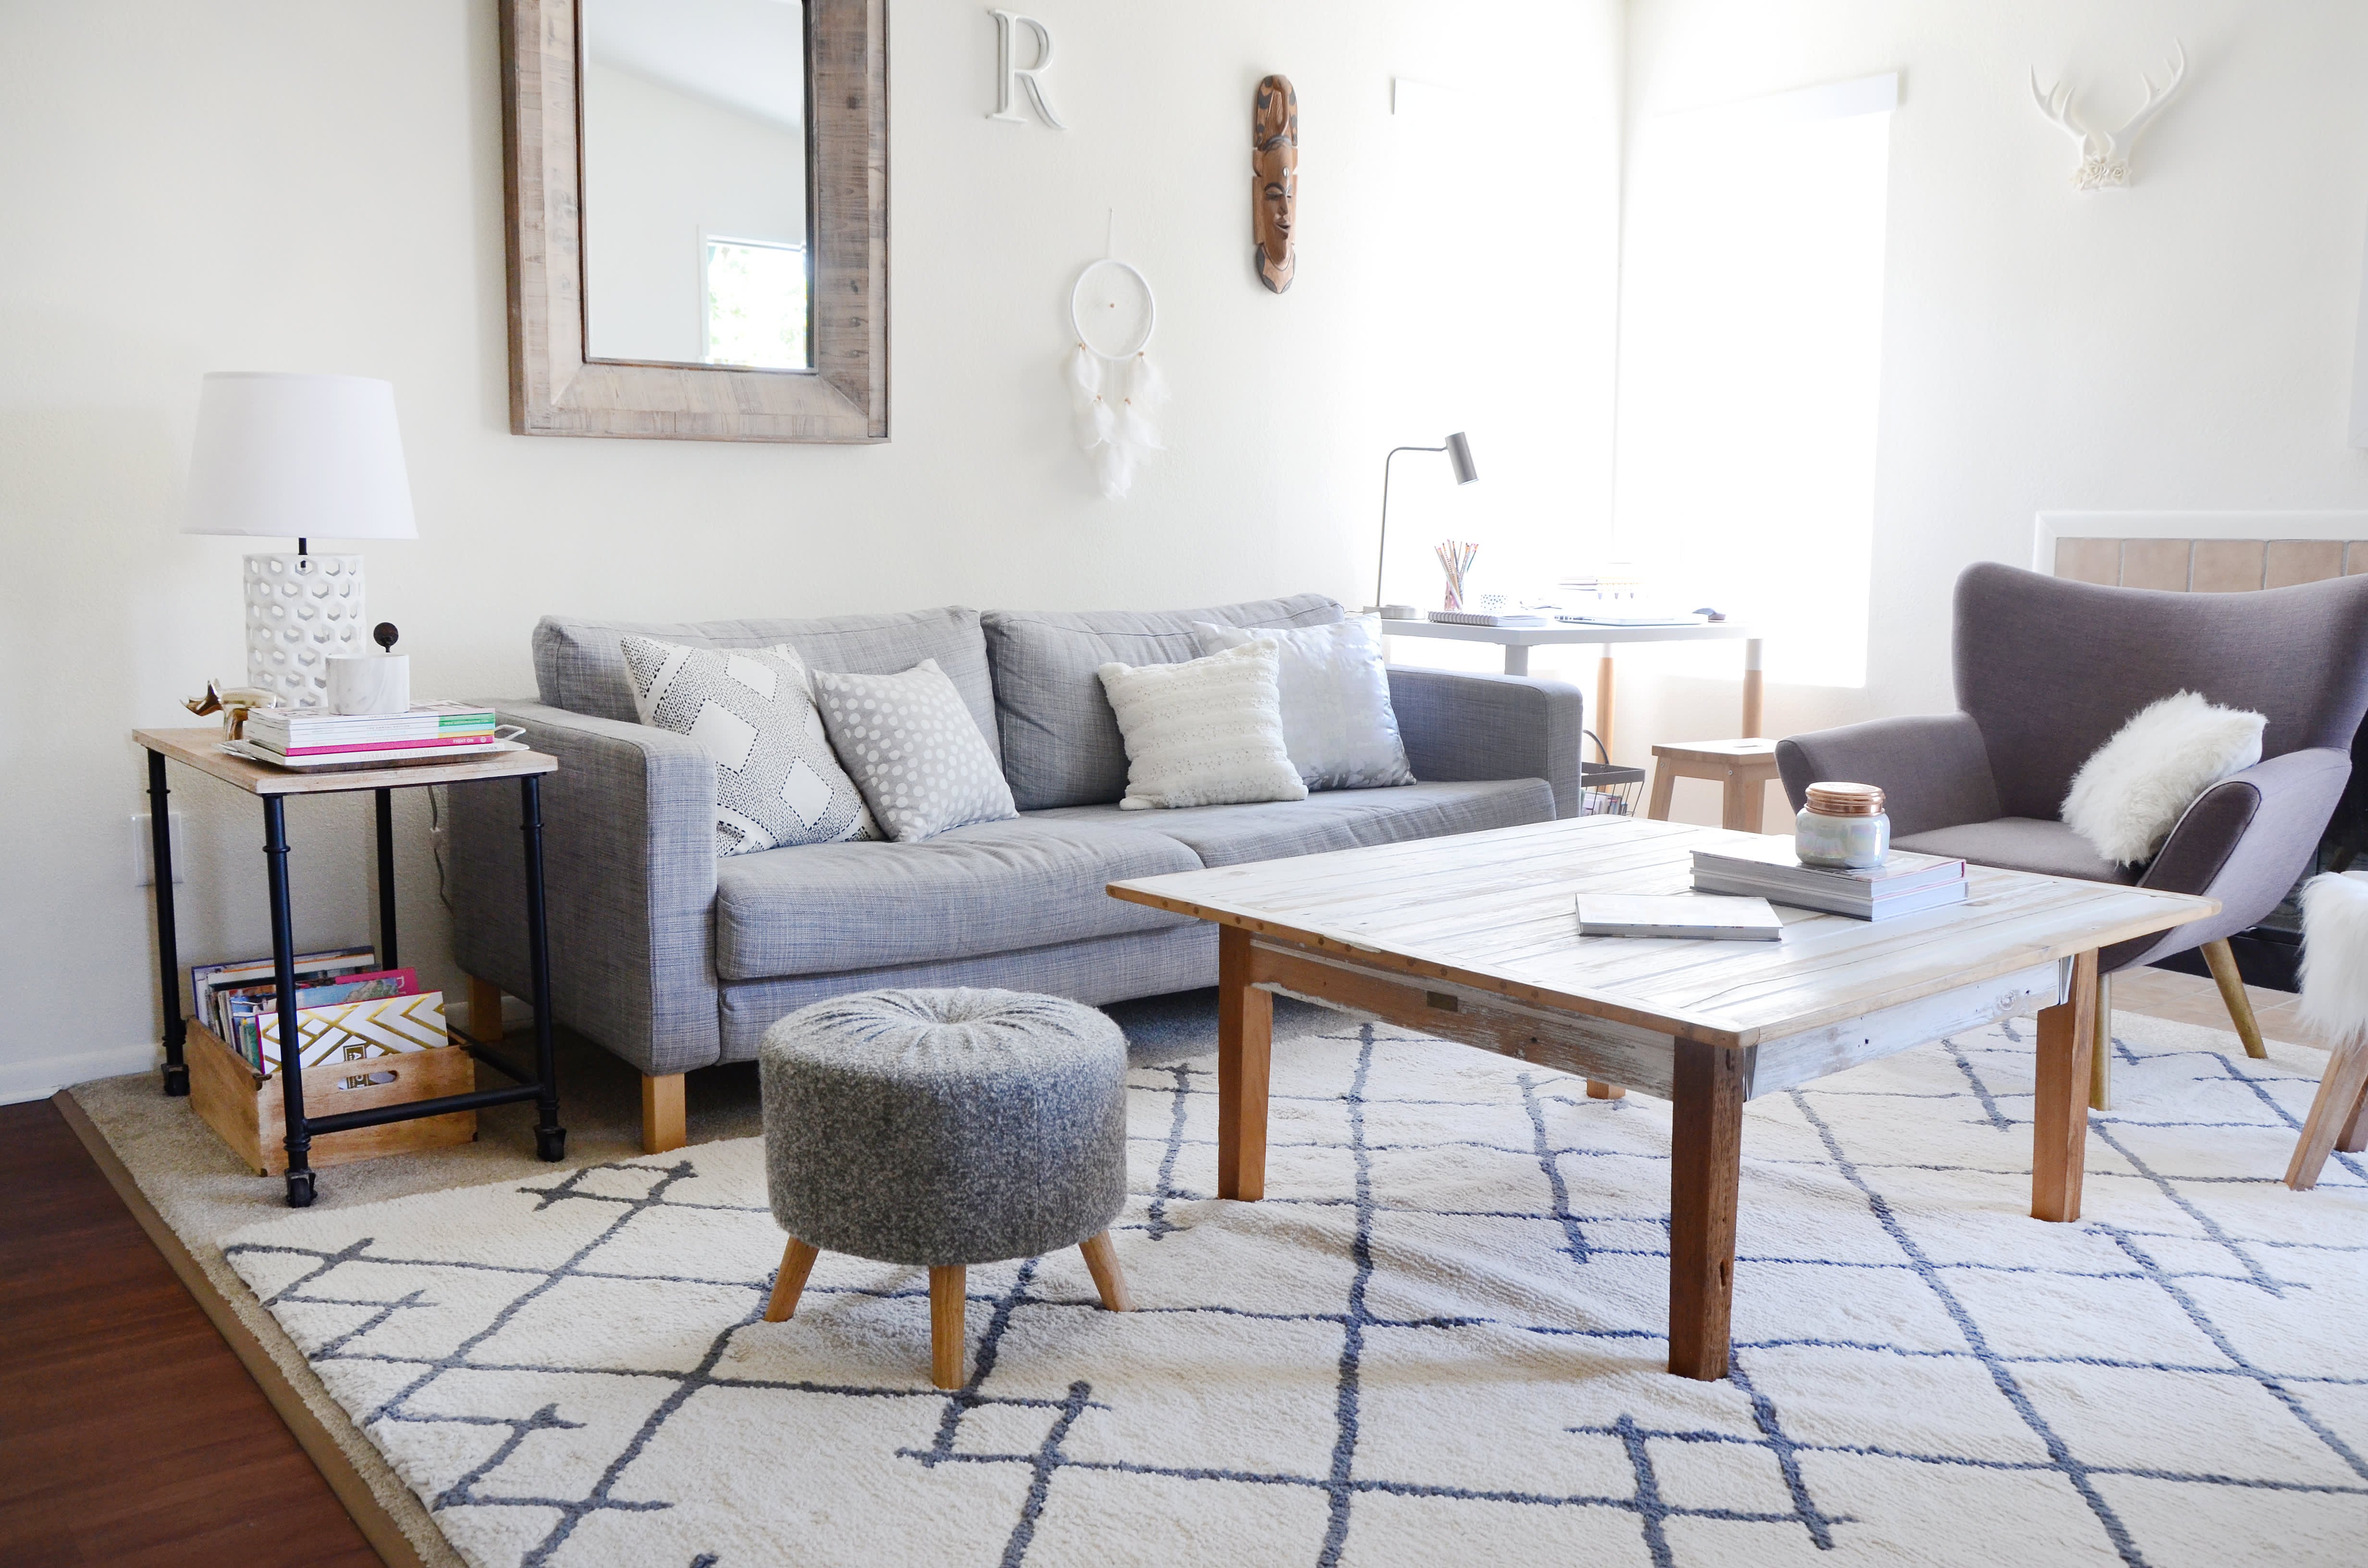 House Tour: A Bright, Chic California Rental Apartment | Apartment Therapy